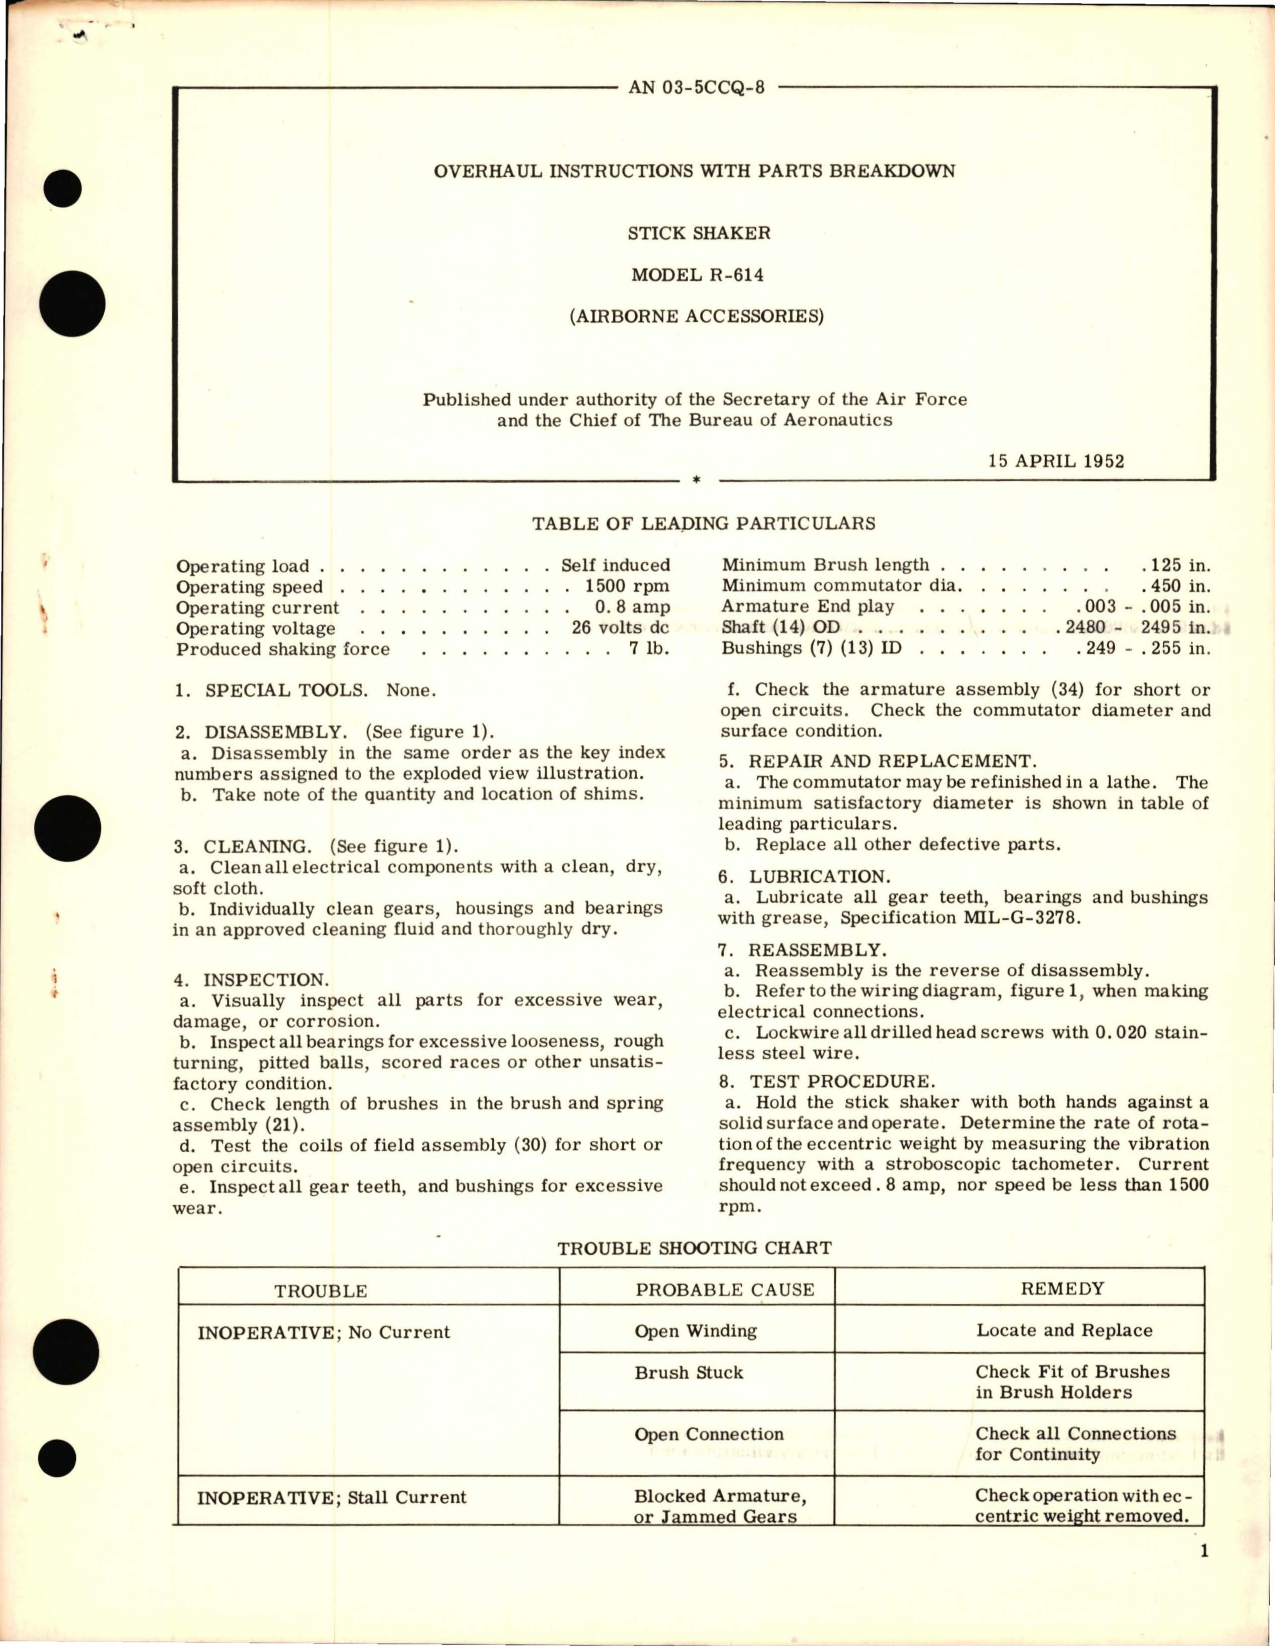 Sample page 1 from AirCorps Library document: Overhaul Instructions with Parts Breakdown for Stick Shaker - Model R-614